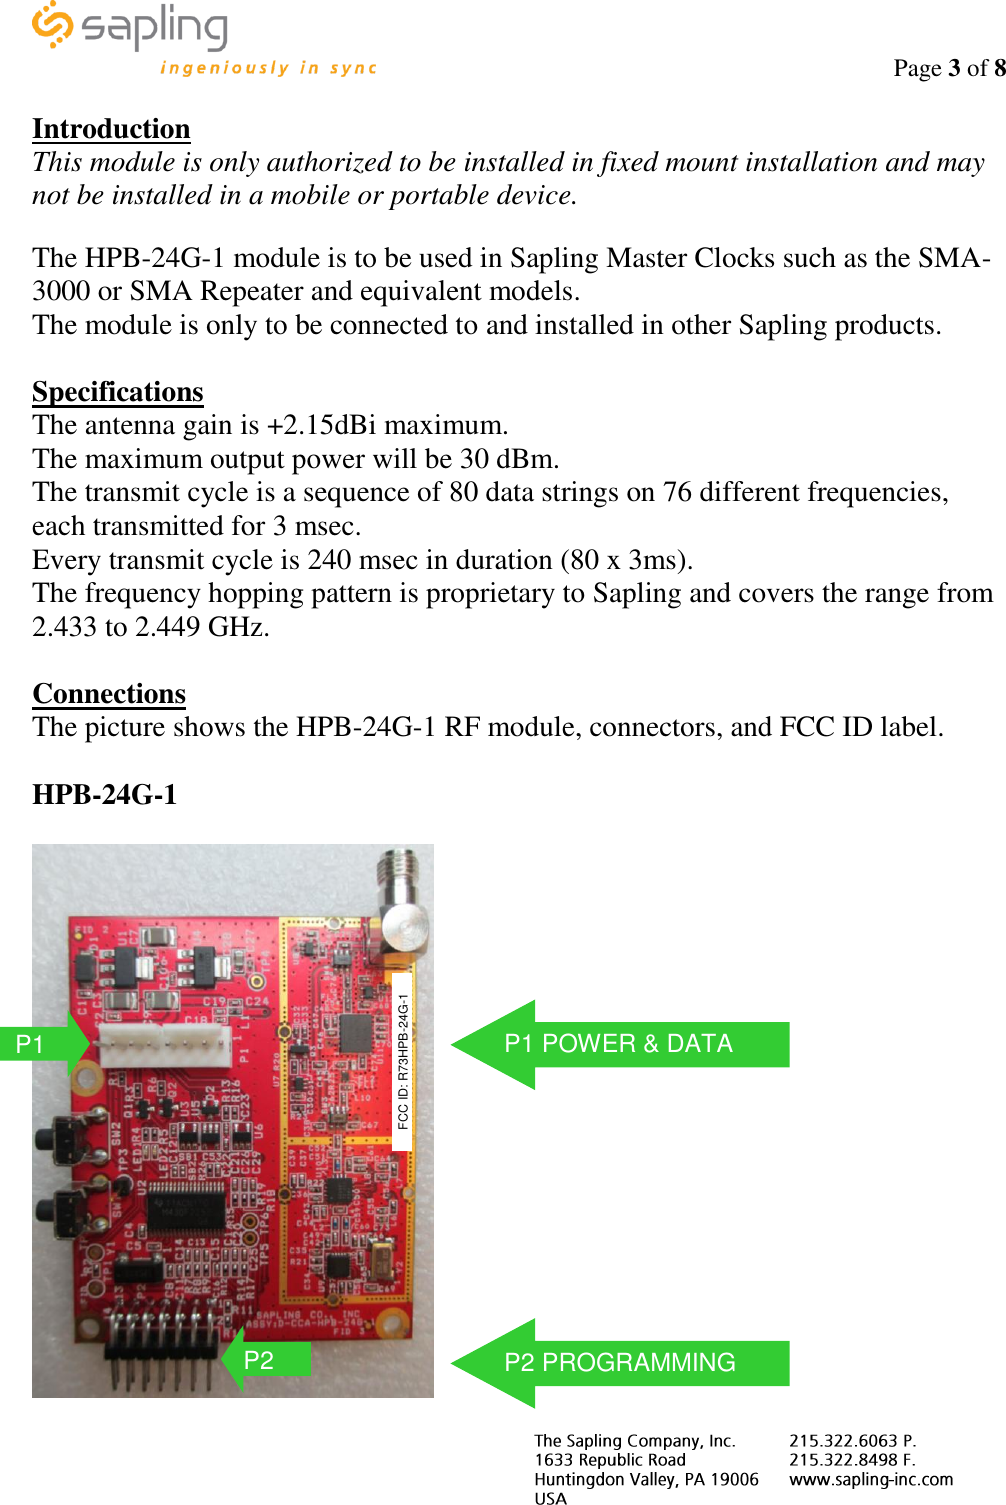                                                                                    Page 3 of 8     Introduction This module is only authorized to be installed in fixed mount installation and may not be installed in a mobile or portable device.  The HPB-24G-1 module is to be used in Sapling Master Clocks such as the SMA-3000 or SMA Repeater and equivalent models. The module is only to be connected to and installed in other Sapling products.  Specifications The antenna gain is +2.15dBi maximum. The maximum output power will be 30 dBm. The transmit cycle is a sequence of 80 data strings on 76 different frequencies, each transmitted for 3 msec. Every transmit cycle is 240 msec in duration (80 x 3ms). The frequency hopping pattern is proprietary to Sapling and covers the range from 2.433 to 2.449 GHz.  Connections The picture shows the HPB-24G-1 RF module, connectors, and FCC ID label.  HPB-24G-1   P1 FCC ID: R73HPB-24G-1 P2 P1 POWER &amp; DATA P2 PROGRAMMING 